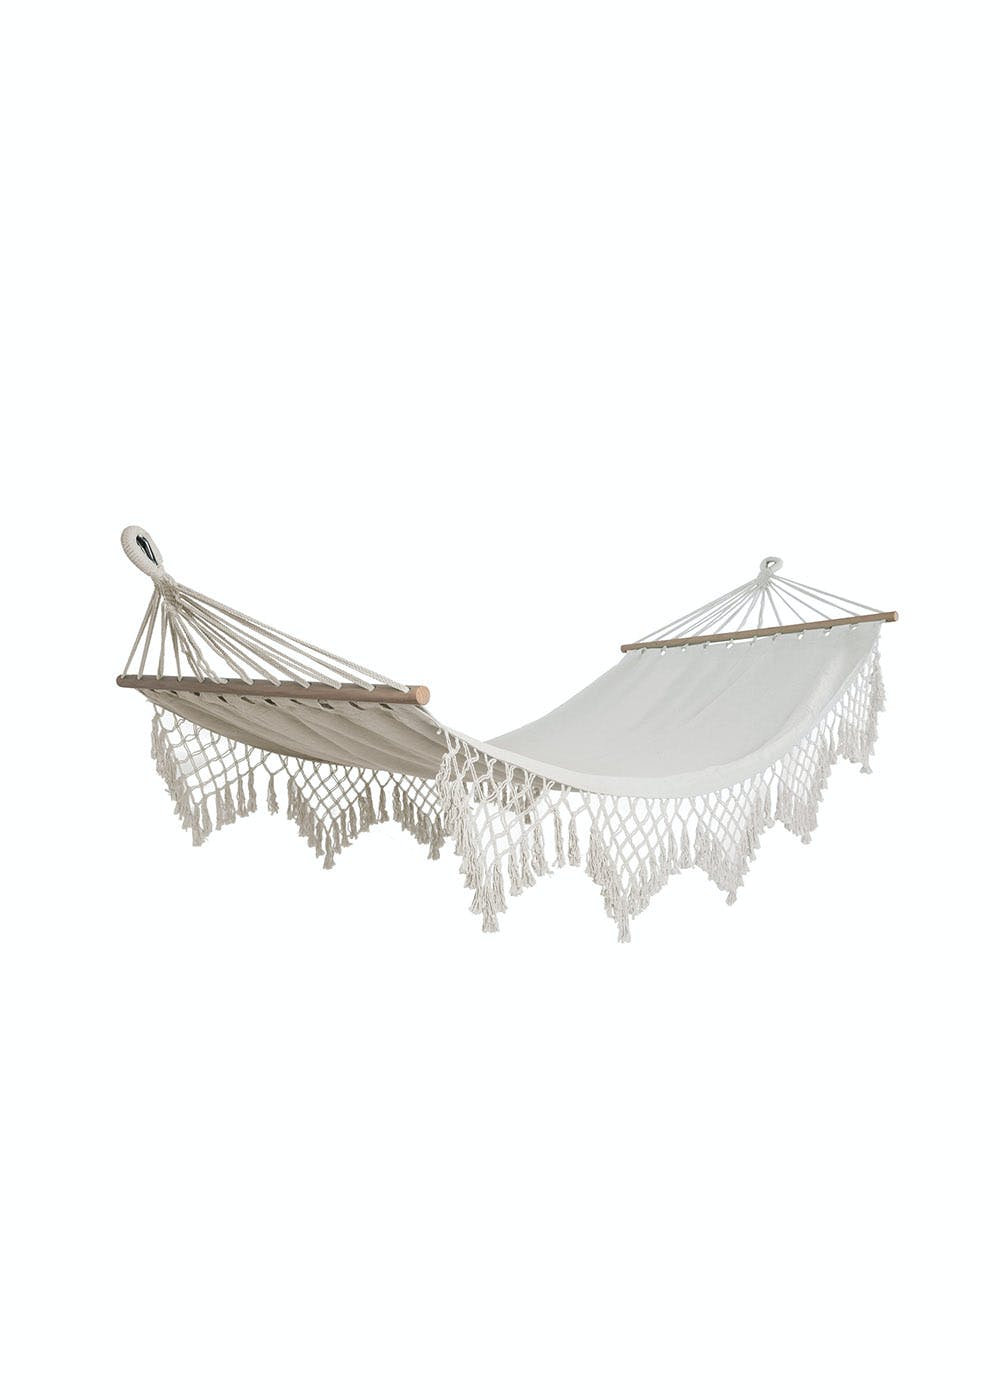 Natural Sling Hammock With Decorative Fringes, 115 Kg Weight Capacity (Single Person Use, 90W X 335L Cm Long)